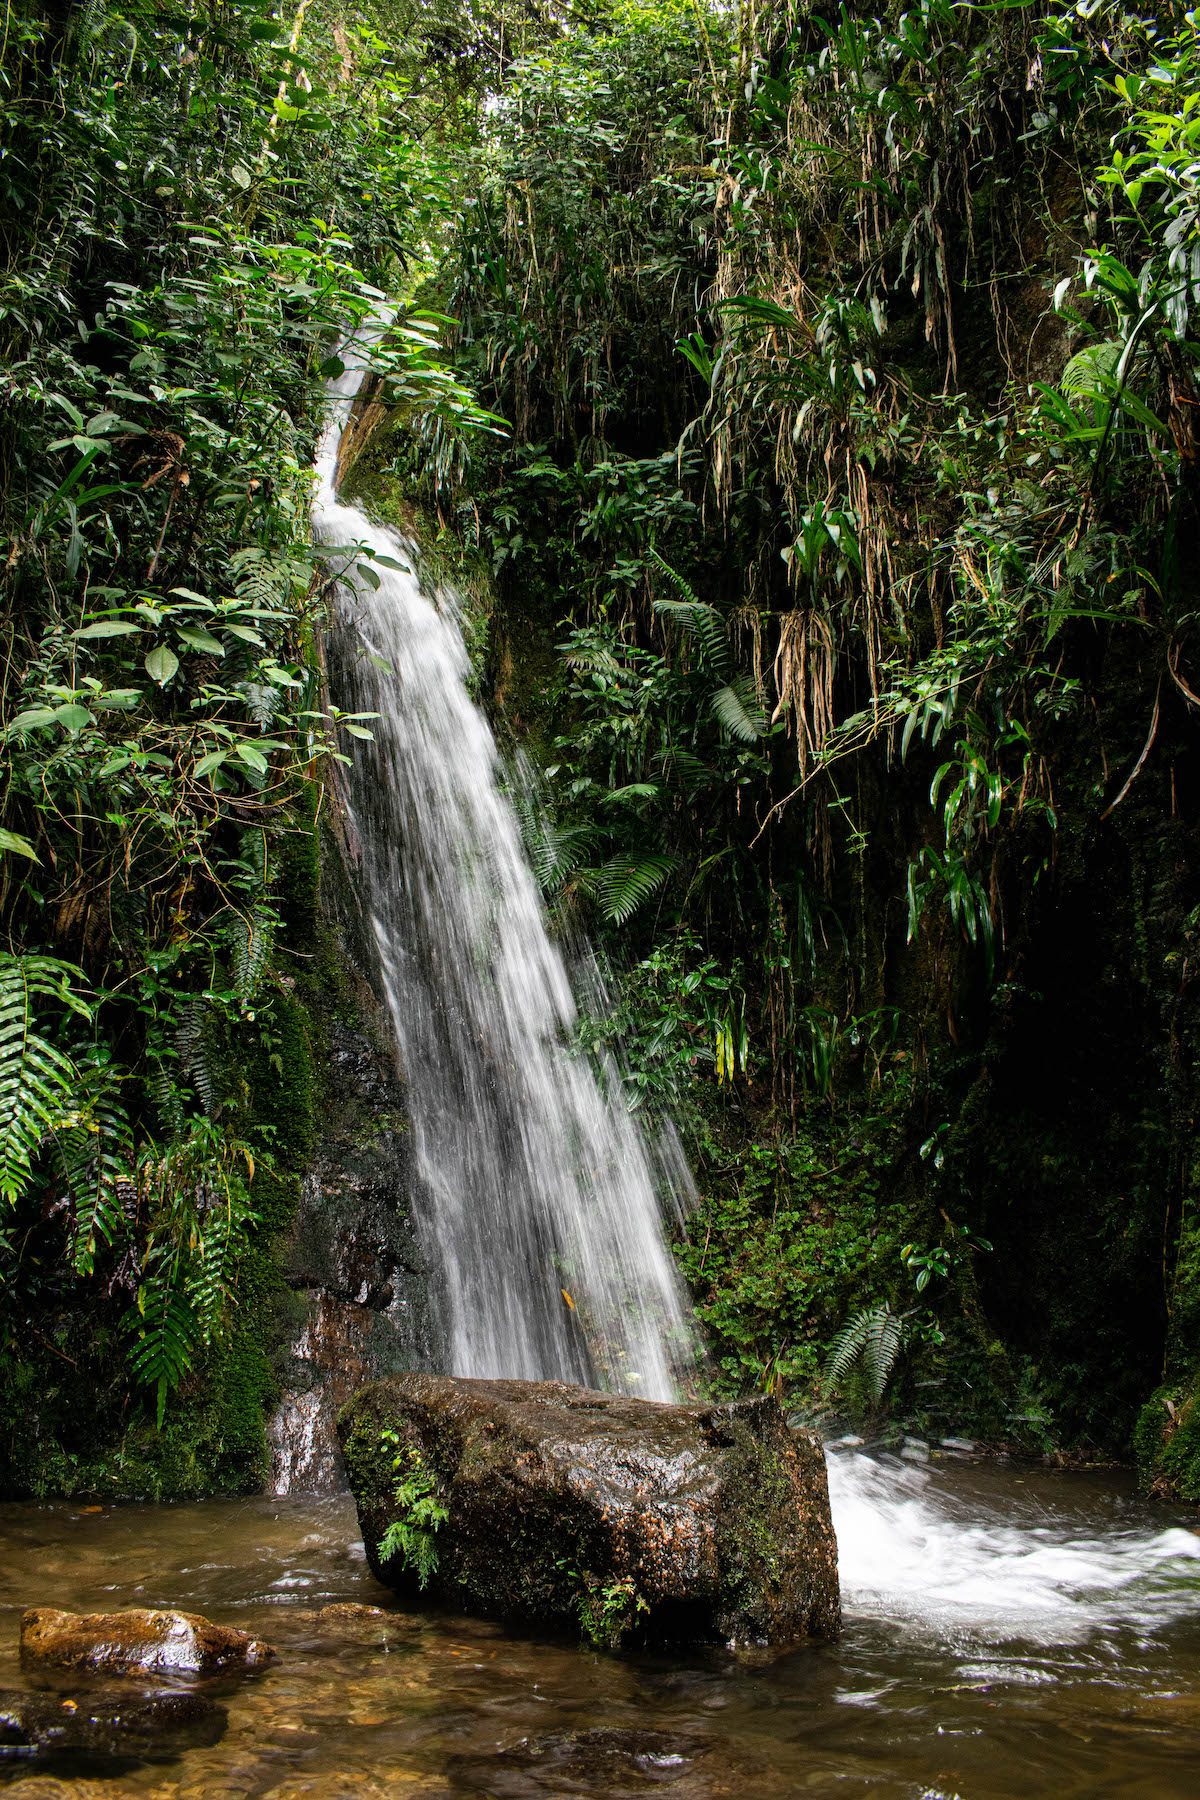 A small waterfall surrounded by greenery